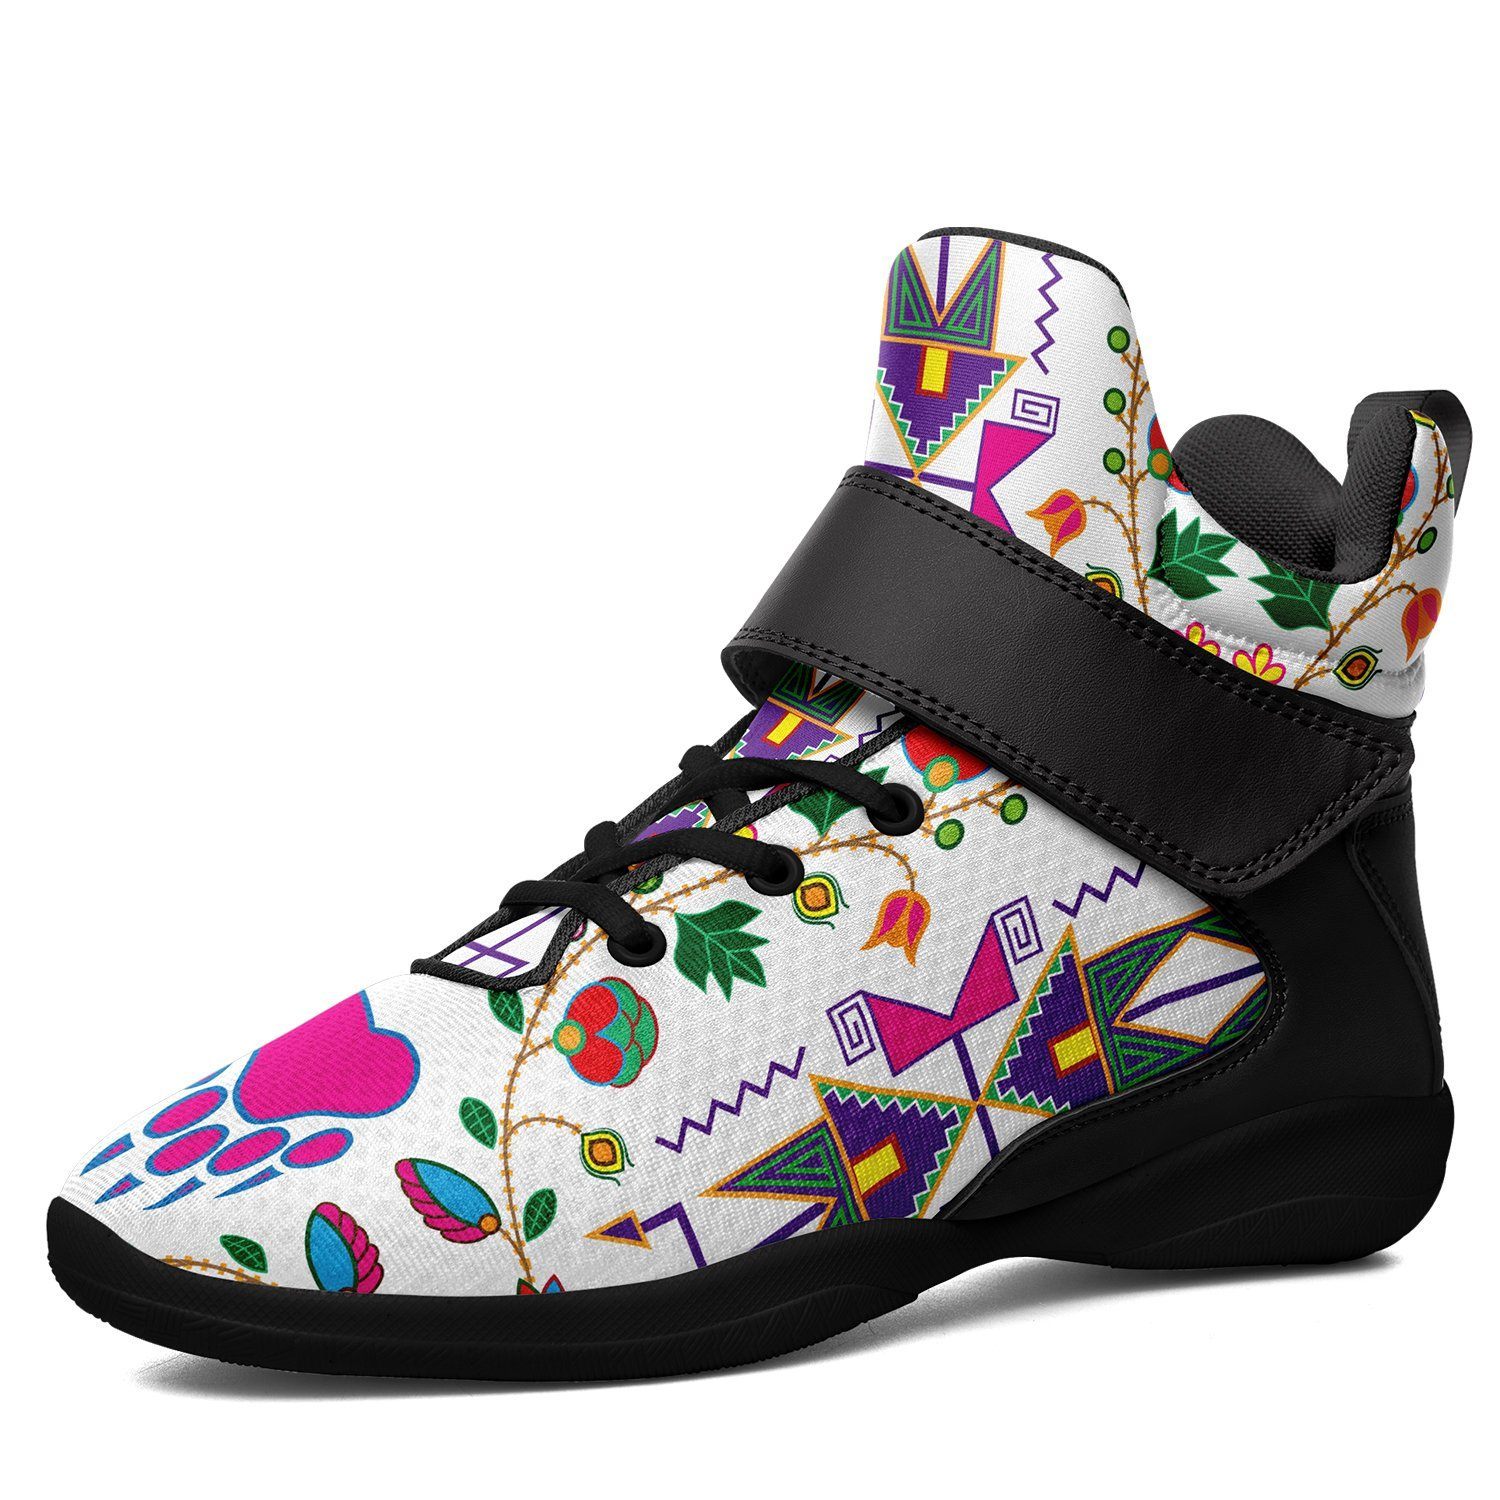 Geometric Floral Fall White Kid's Ipottaa Basketball / Sport High Top Shoes 49 Dzine US Women 4.5 / US Youth 3.5 / EUR 35 Black Sole with Black Strap 